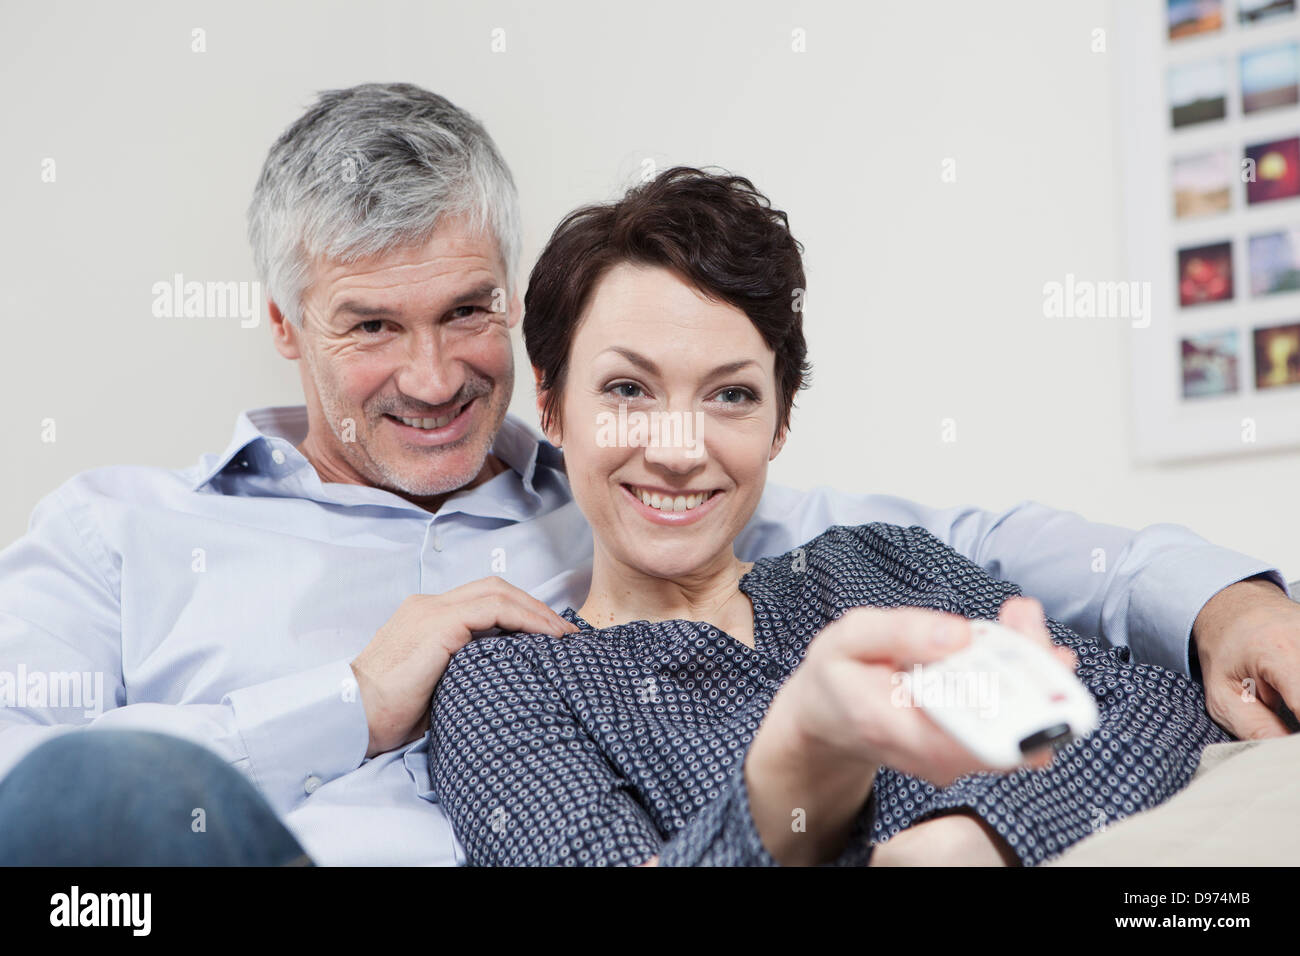 Germany, Bavaria, Munich, Couple changing channels with remote control, smiling Stock Photo